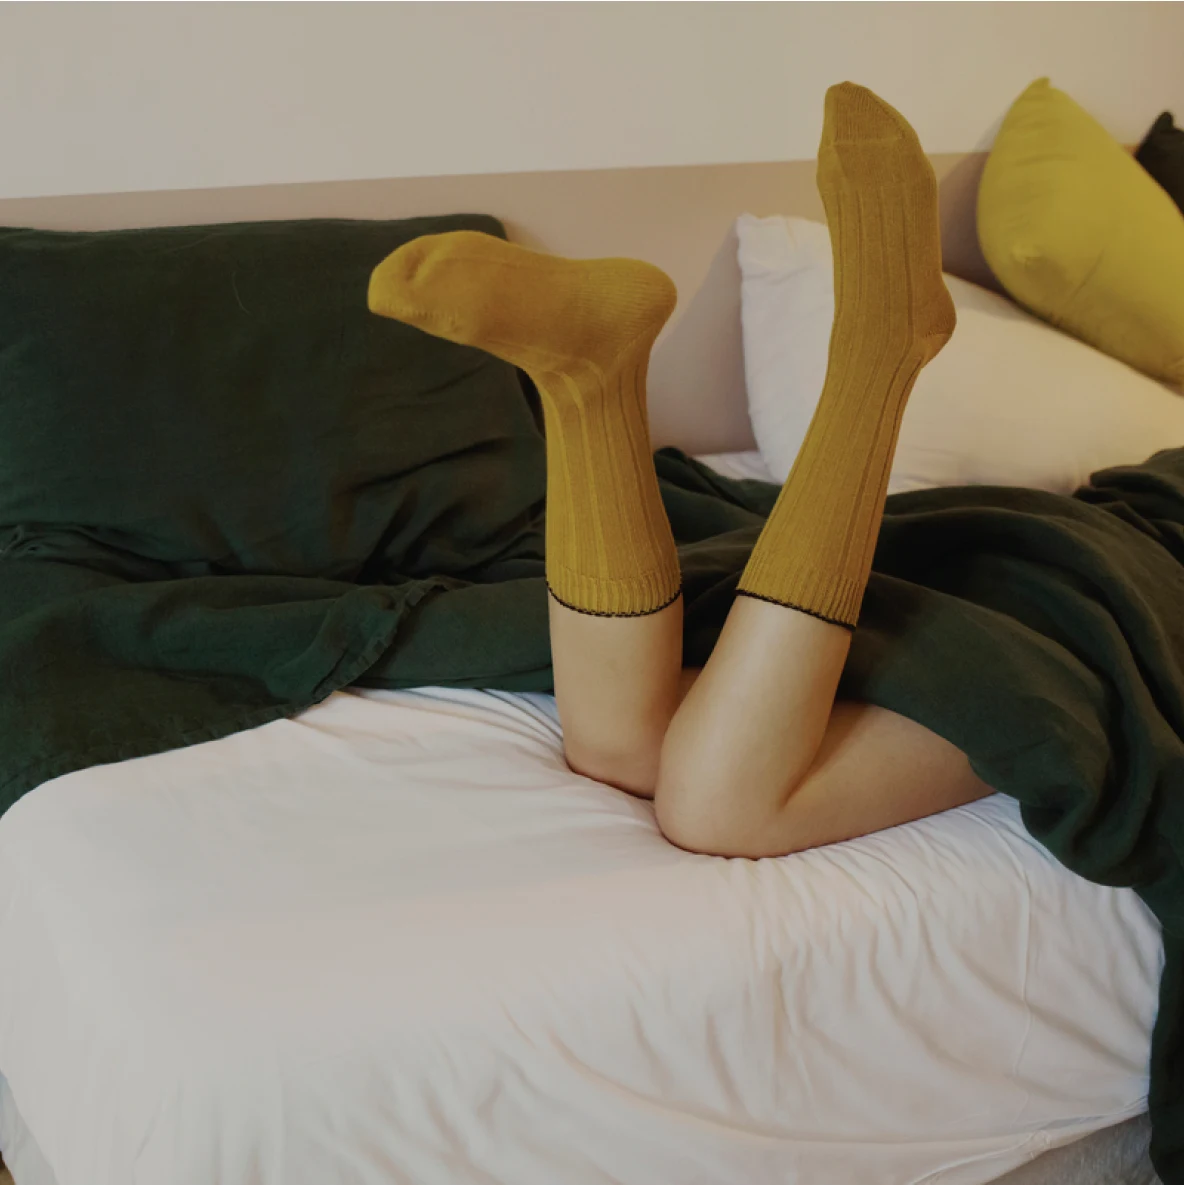 A shot of a woman’s legs wearing mustard colored socks on a bed with assorted pillows covered in a green blanket.